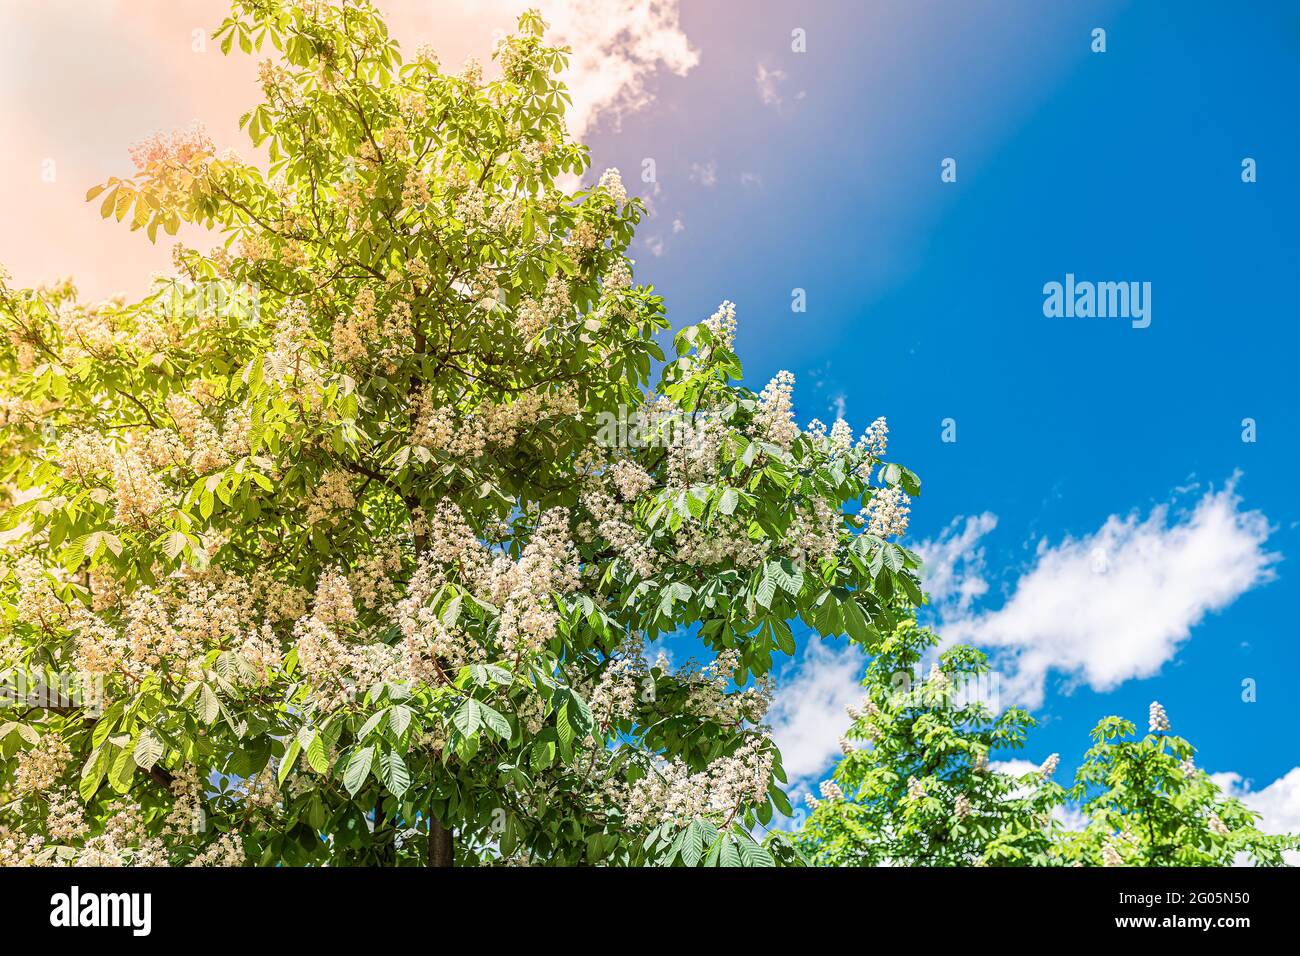 Blooming chestnut tree against the blue spring sky. Flare. The symbol of the city of Kiev - chestnut Stock Photo